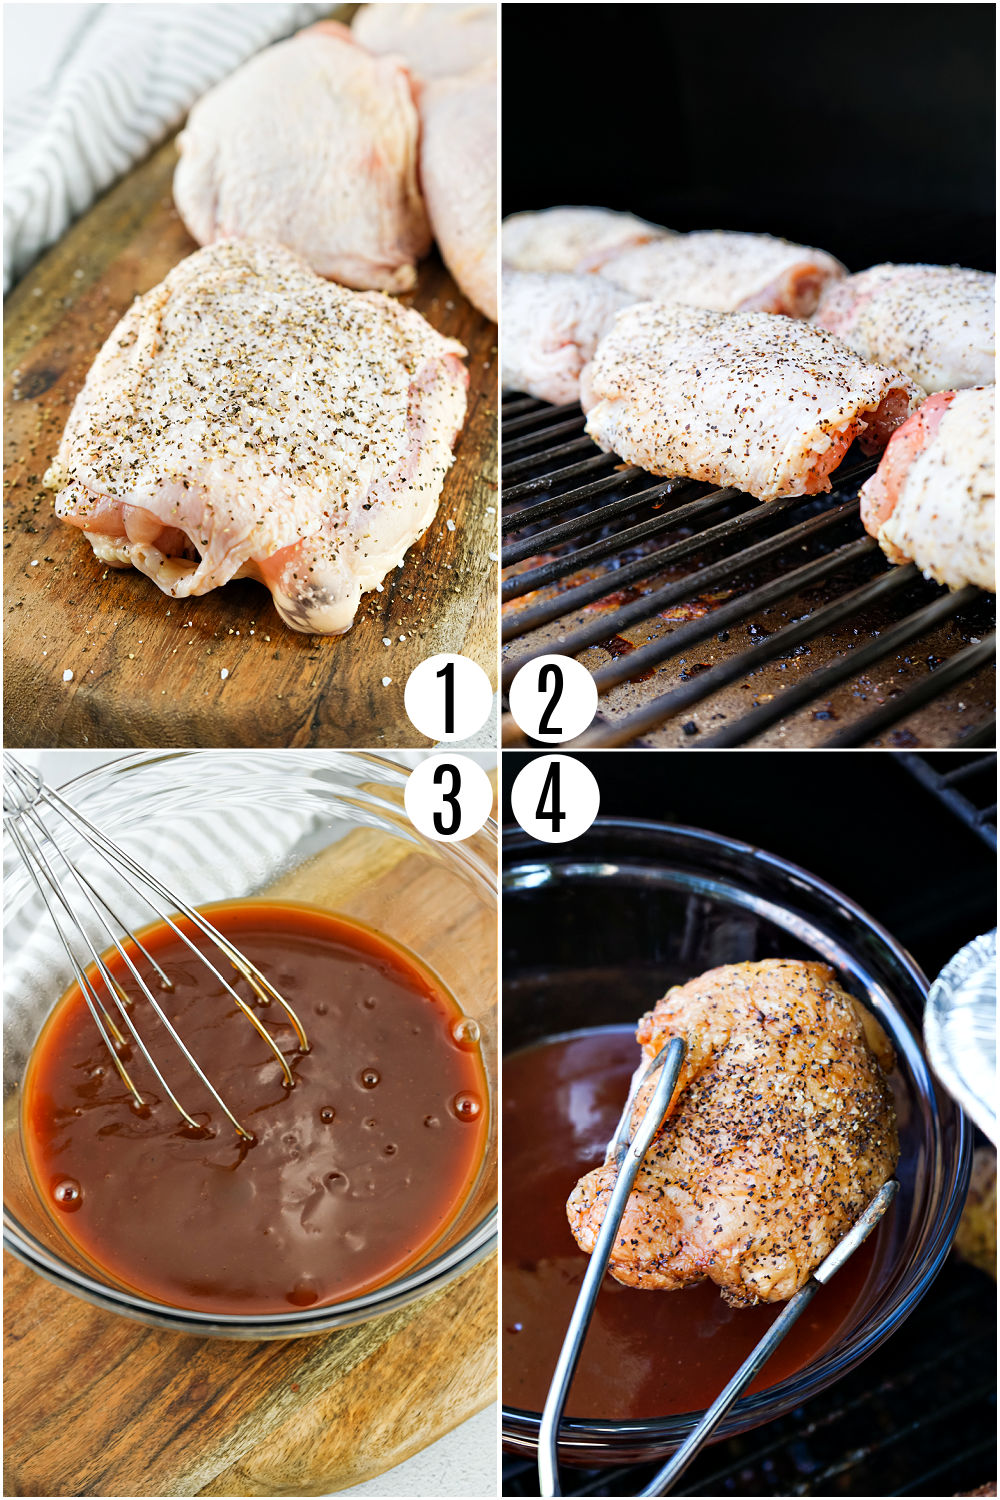 Step by step photos showing how to make bbq chicken thighs on a smoker.